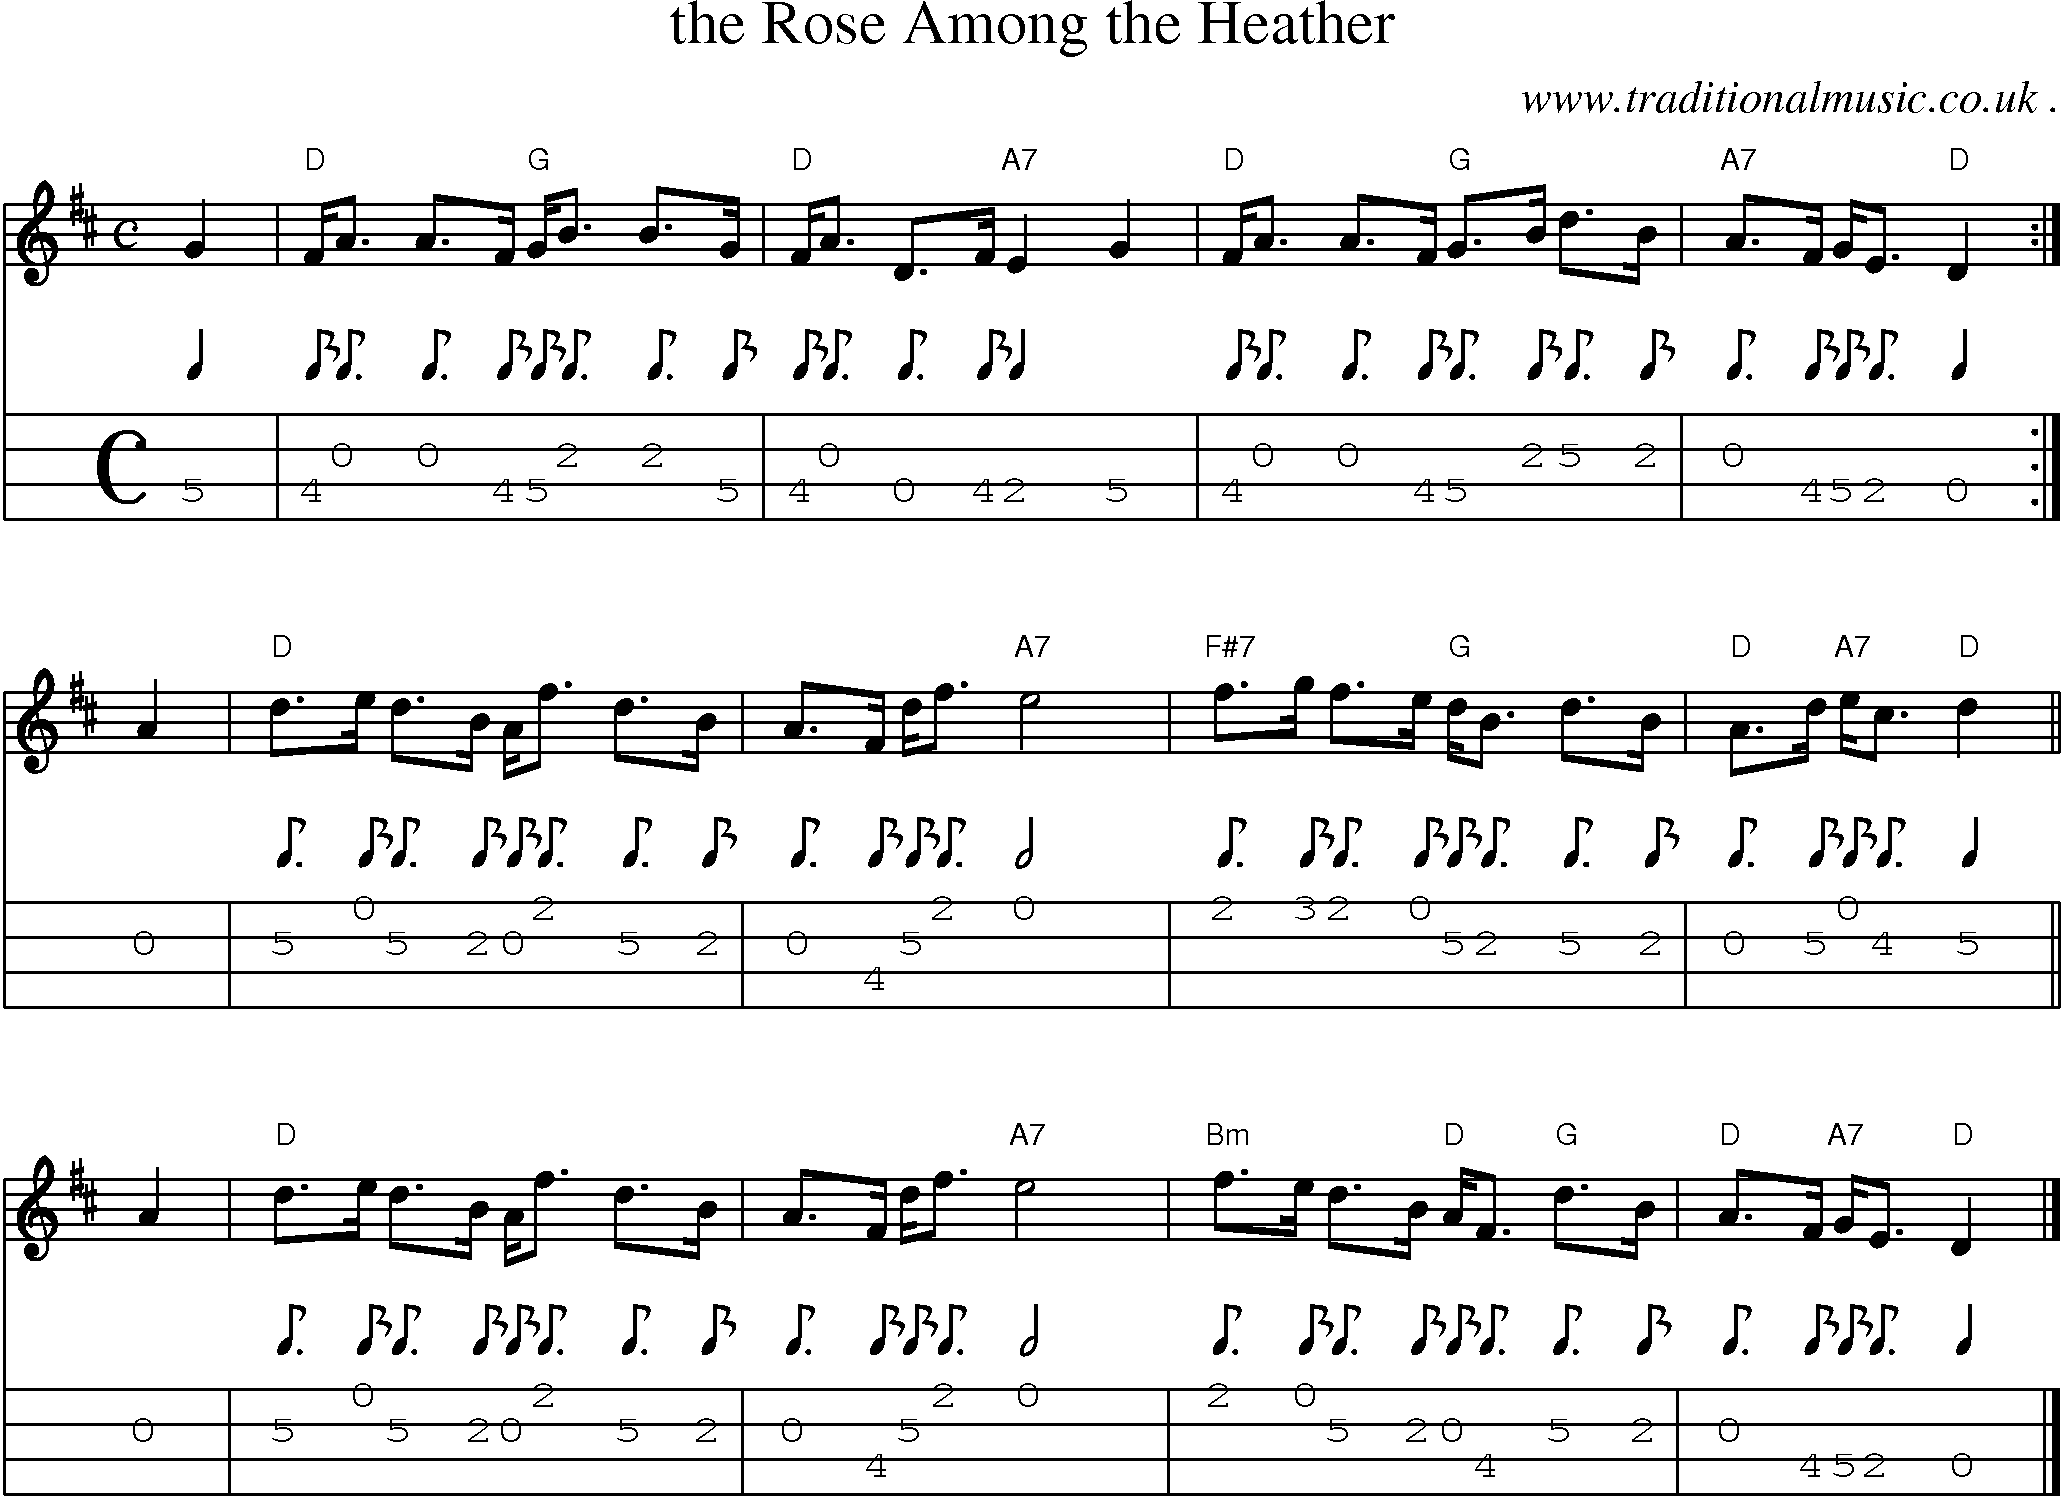 Sheet-music  score, Chords and Mandolin Tabs for The Rose Among The Heather